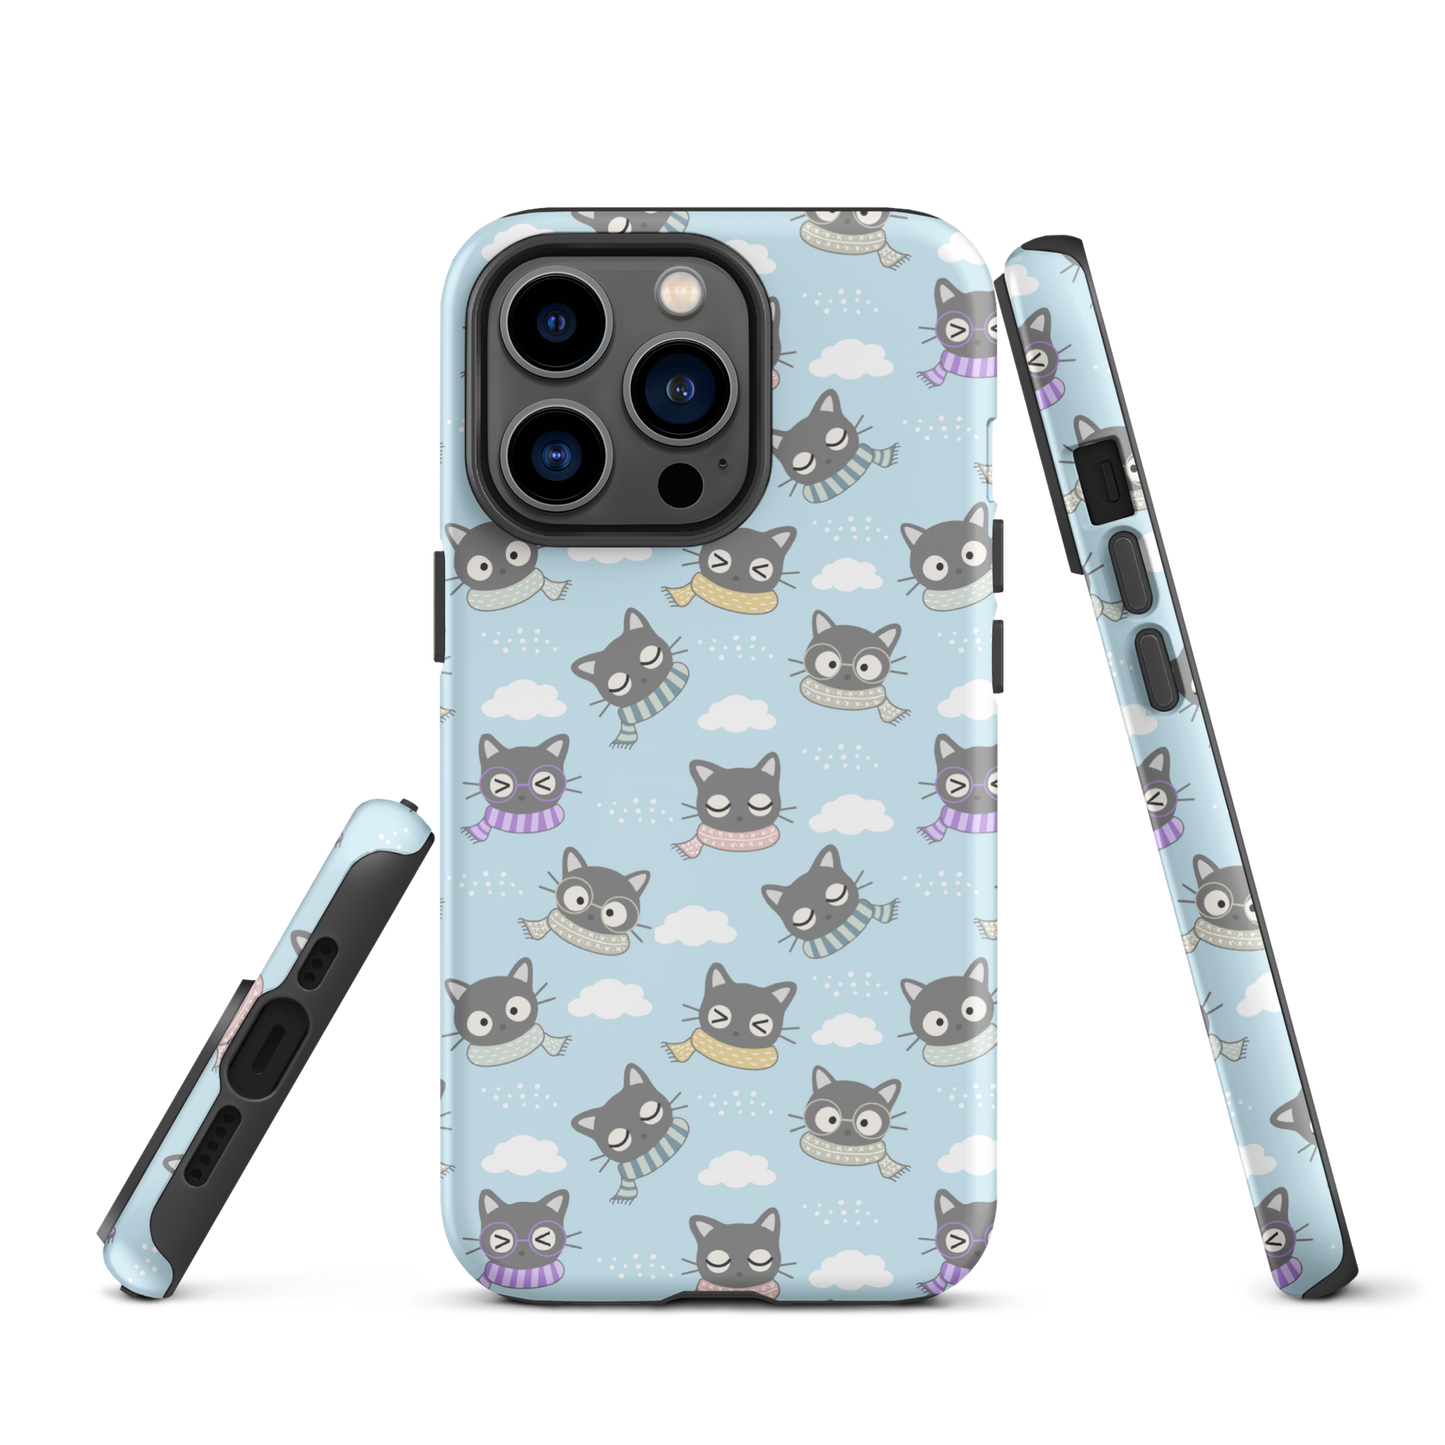 Tough case for iPhone 11, 12, 13, 14, 15 Variations | Gray Cat with Scarf in the Cloud